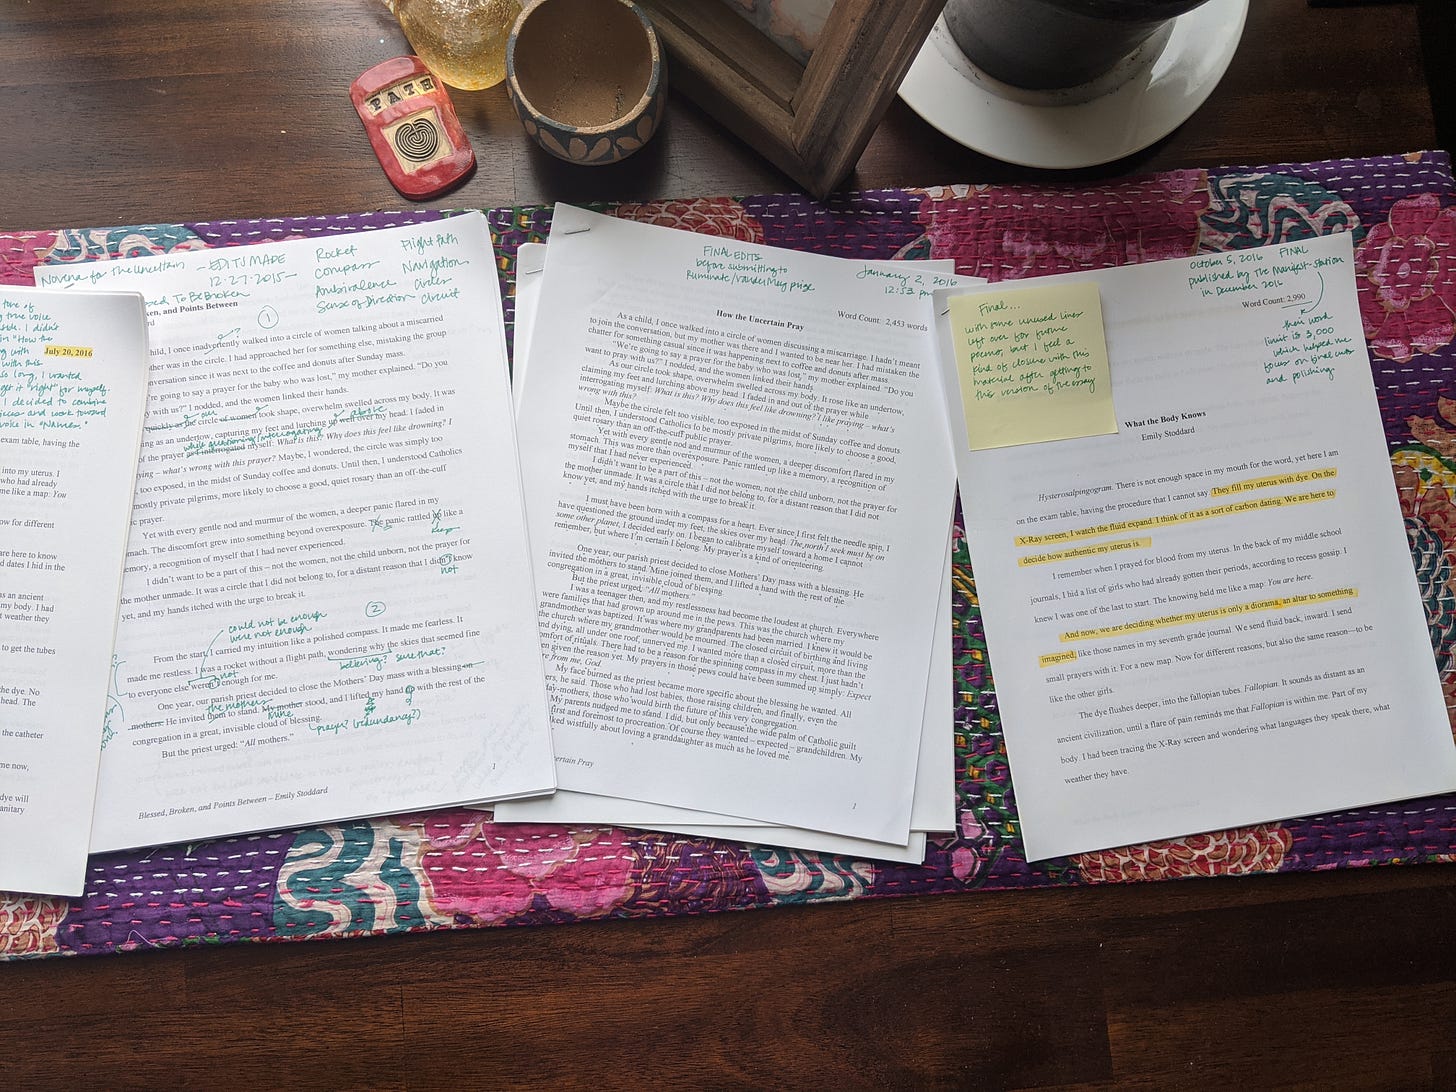 A series of small paper piles spread across a table, on top of a colorful purple runner. The drafts have highlighted parts and marks in green ink, where I've noted changes or themes that I have questions about.